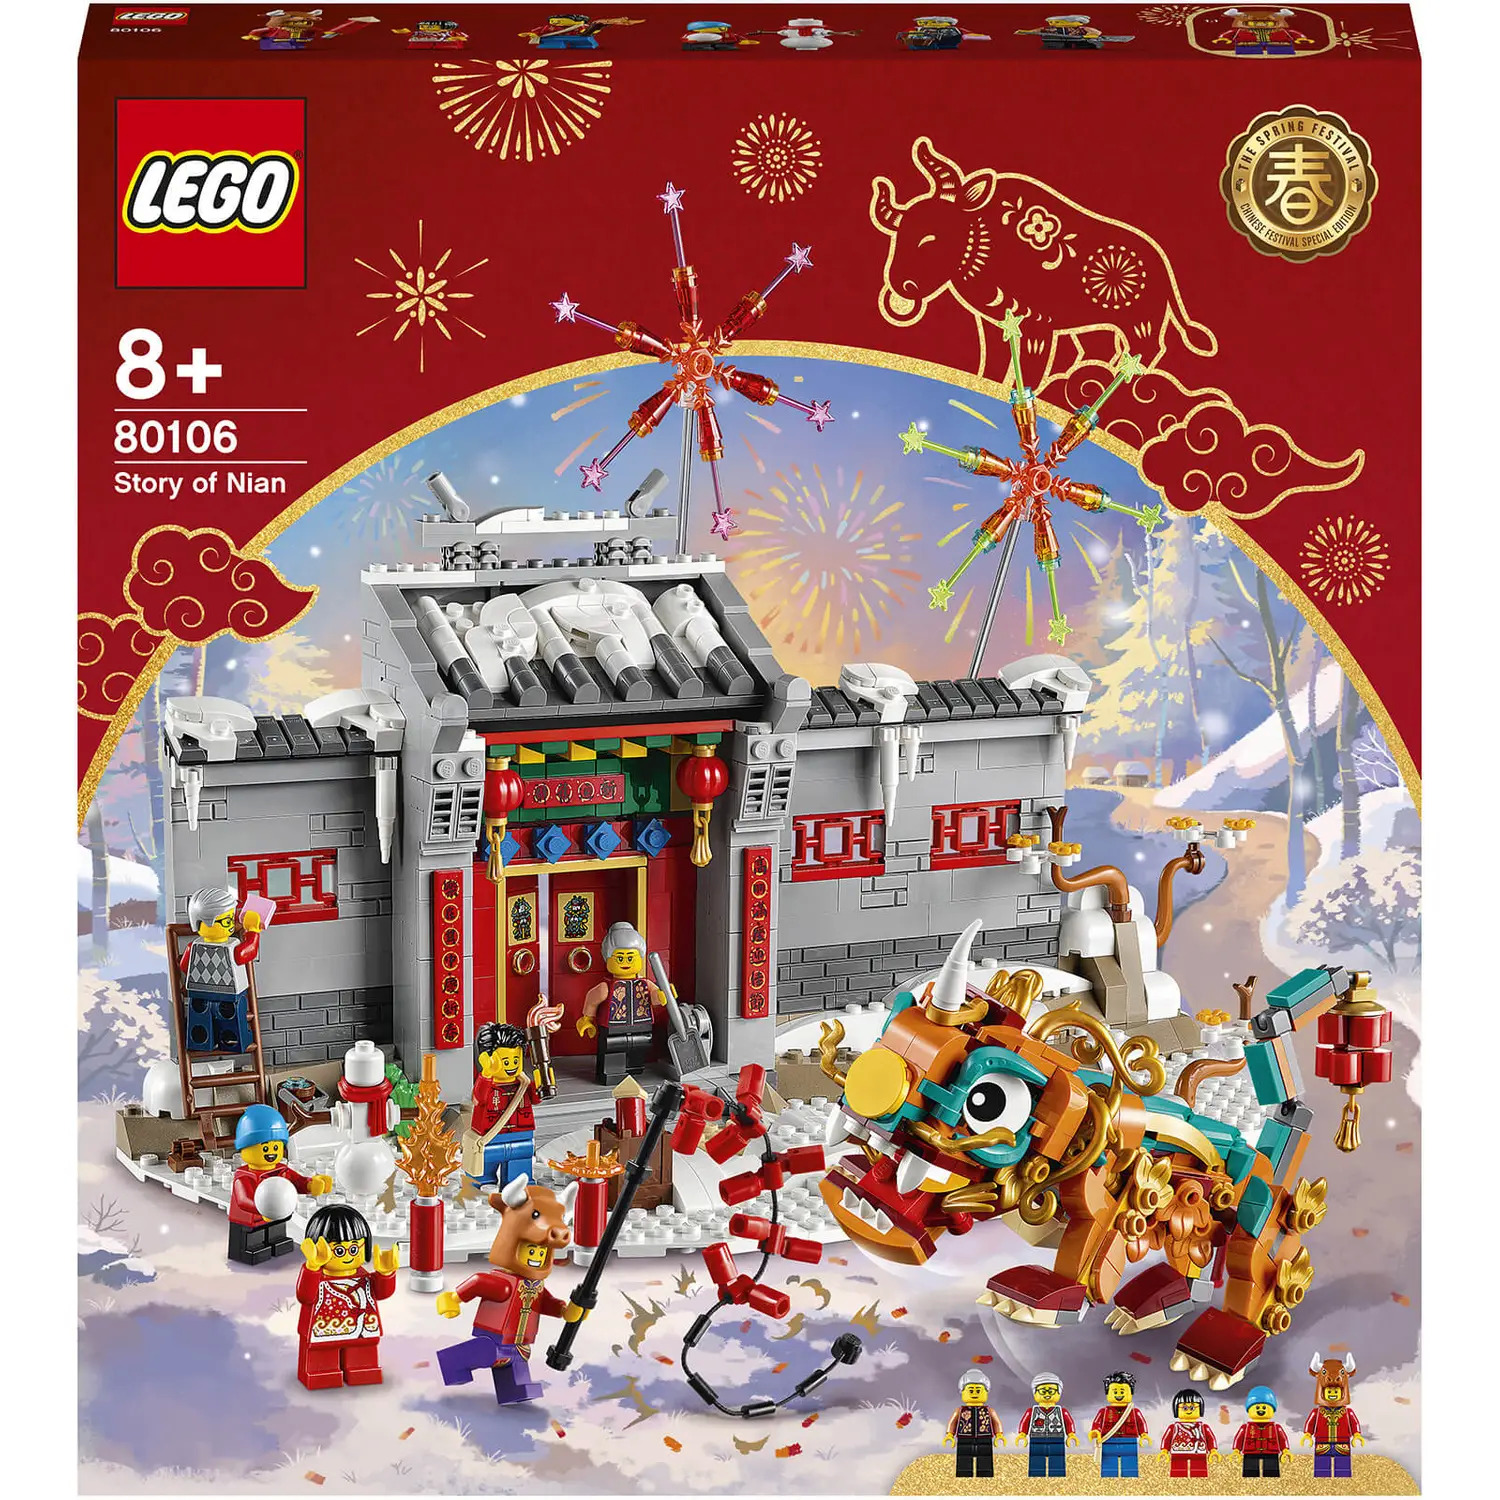 LEGO Chinese Festivals: Story of Nian Playset (80106) for $64.99